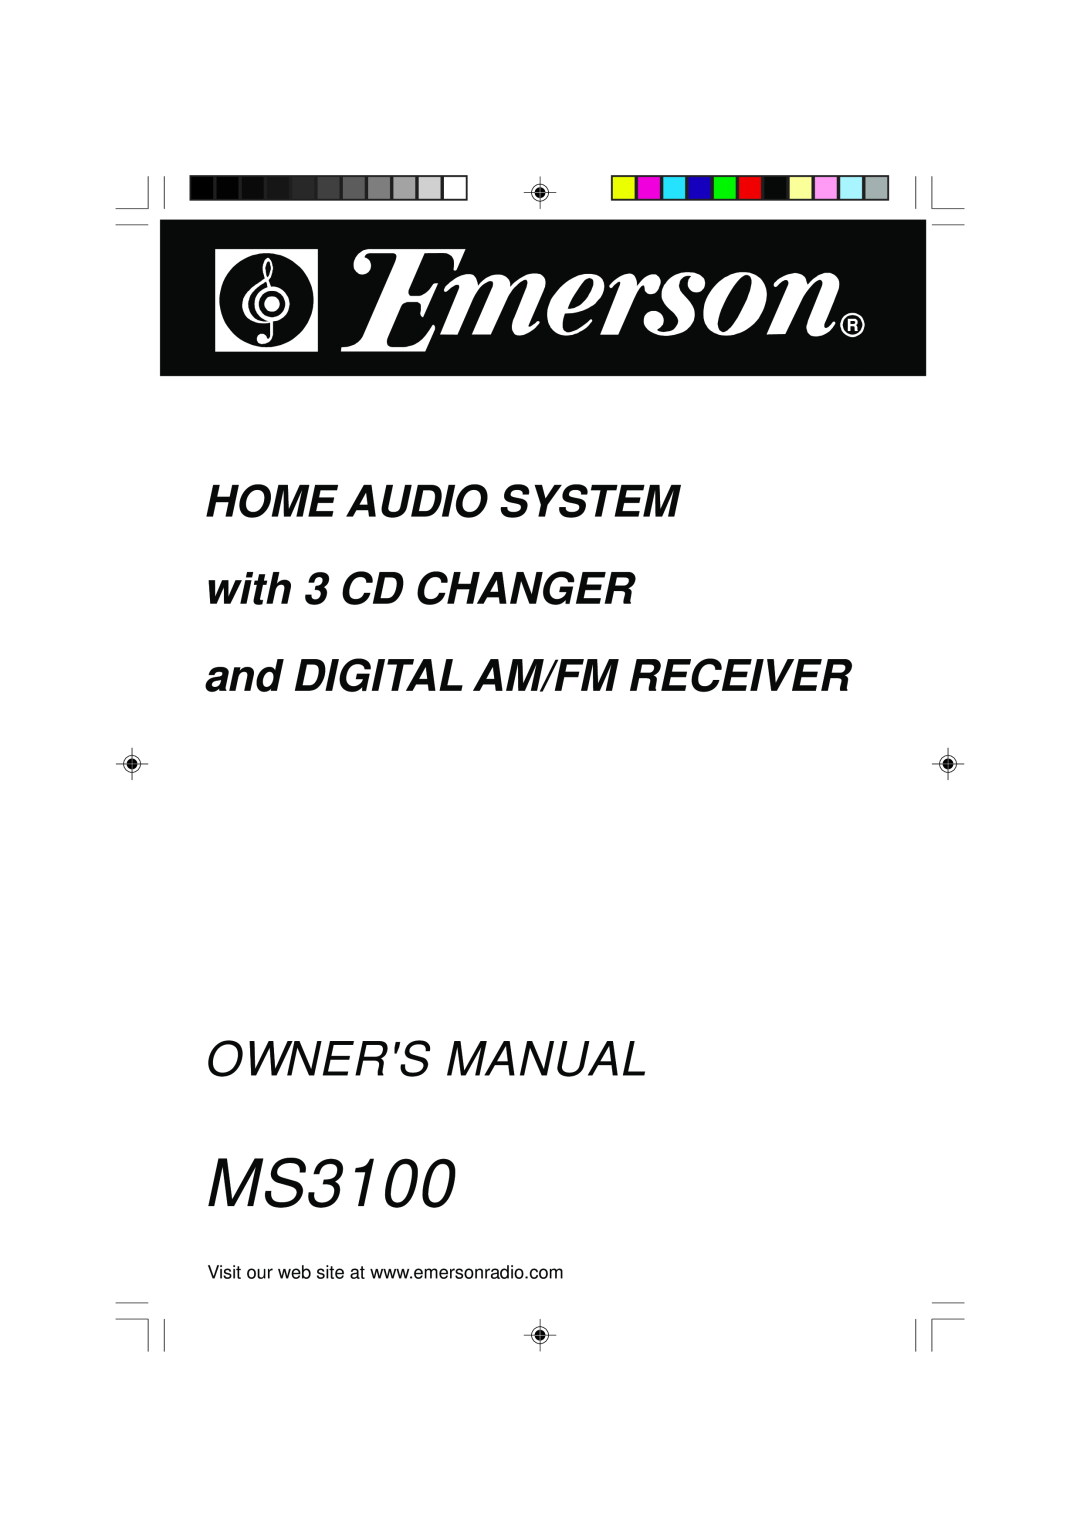 Emerson MS3100 owner manual HOME AUDIO SYSTEM with 3 CD CHANGER, and DIGITAL AM/FM RECEIVER 